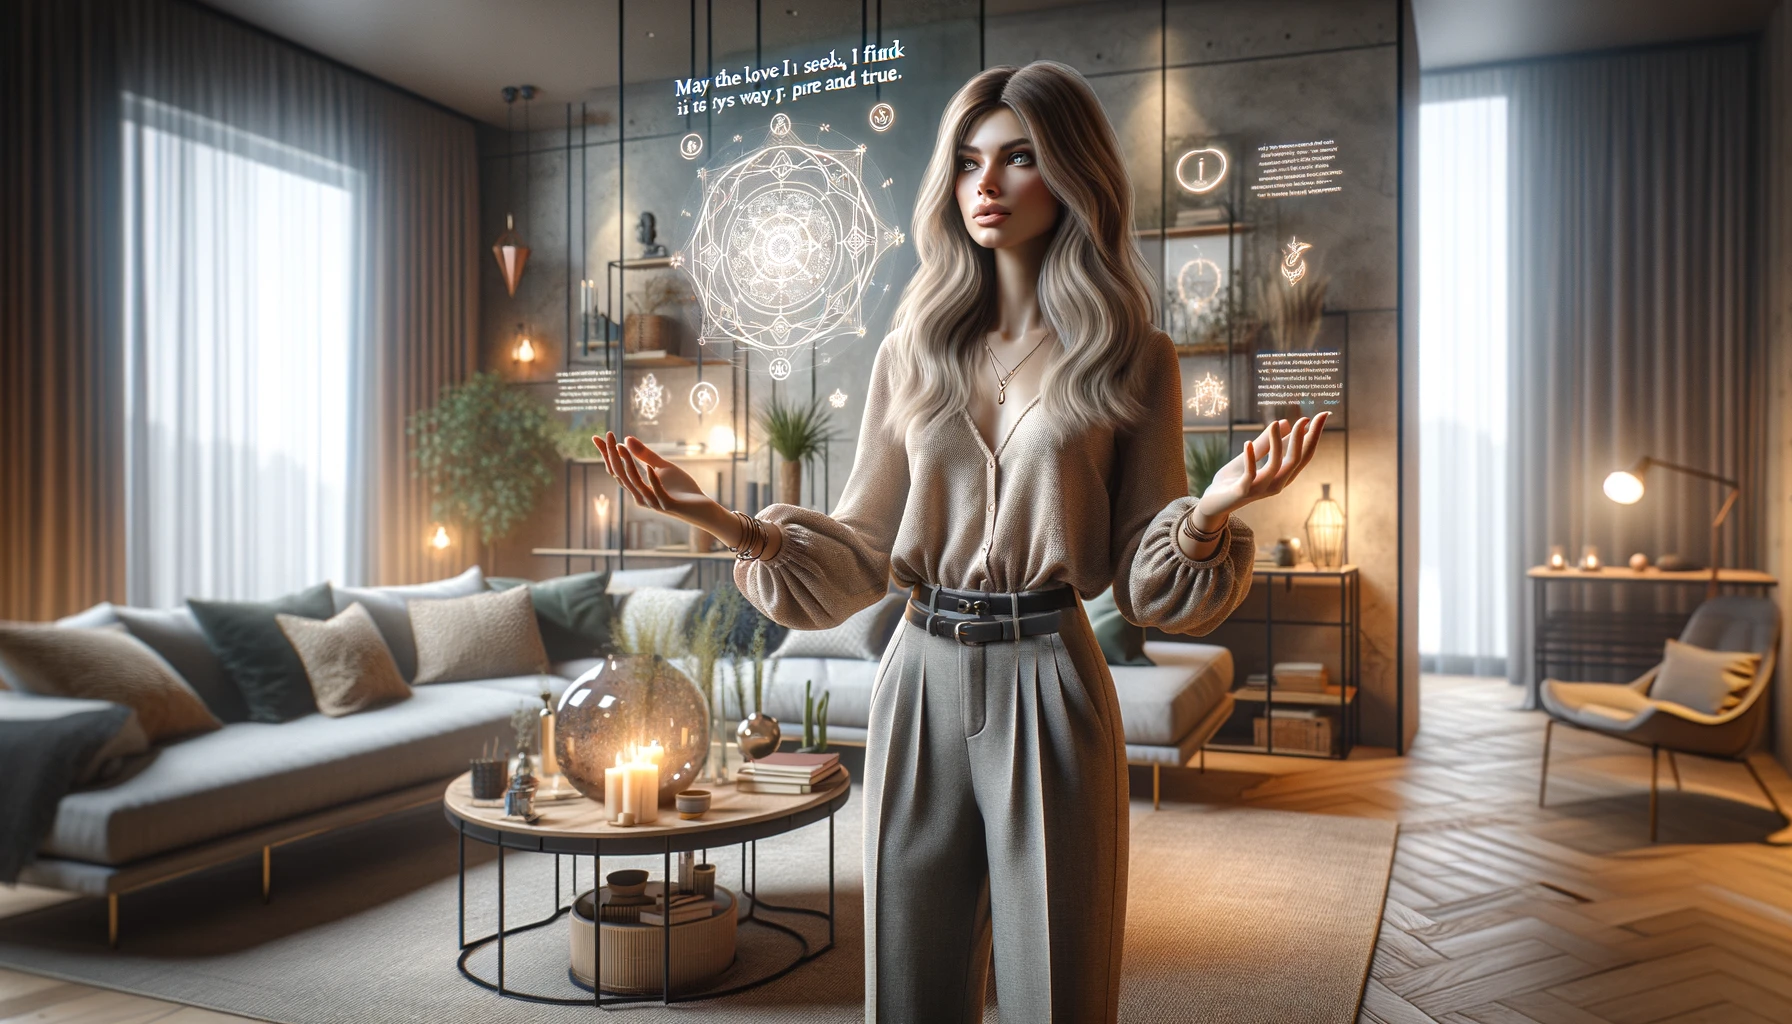 AI image of a modern, stylish young witch reciting a spell in her cozy lounge. She stands centered in a room with modern furnishings, her expression focused and serene, hands outstretched as if channeling energy. On the right side of the image, the spell 'May the love I seek find its way to my heart, pure and true' is artistically integrated into the scene, merging the mystical with a contemporary setting.